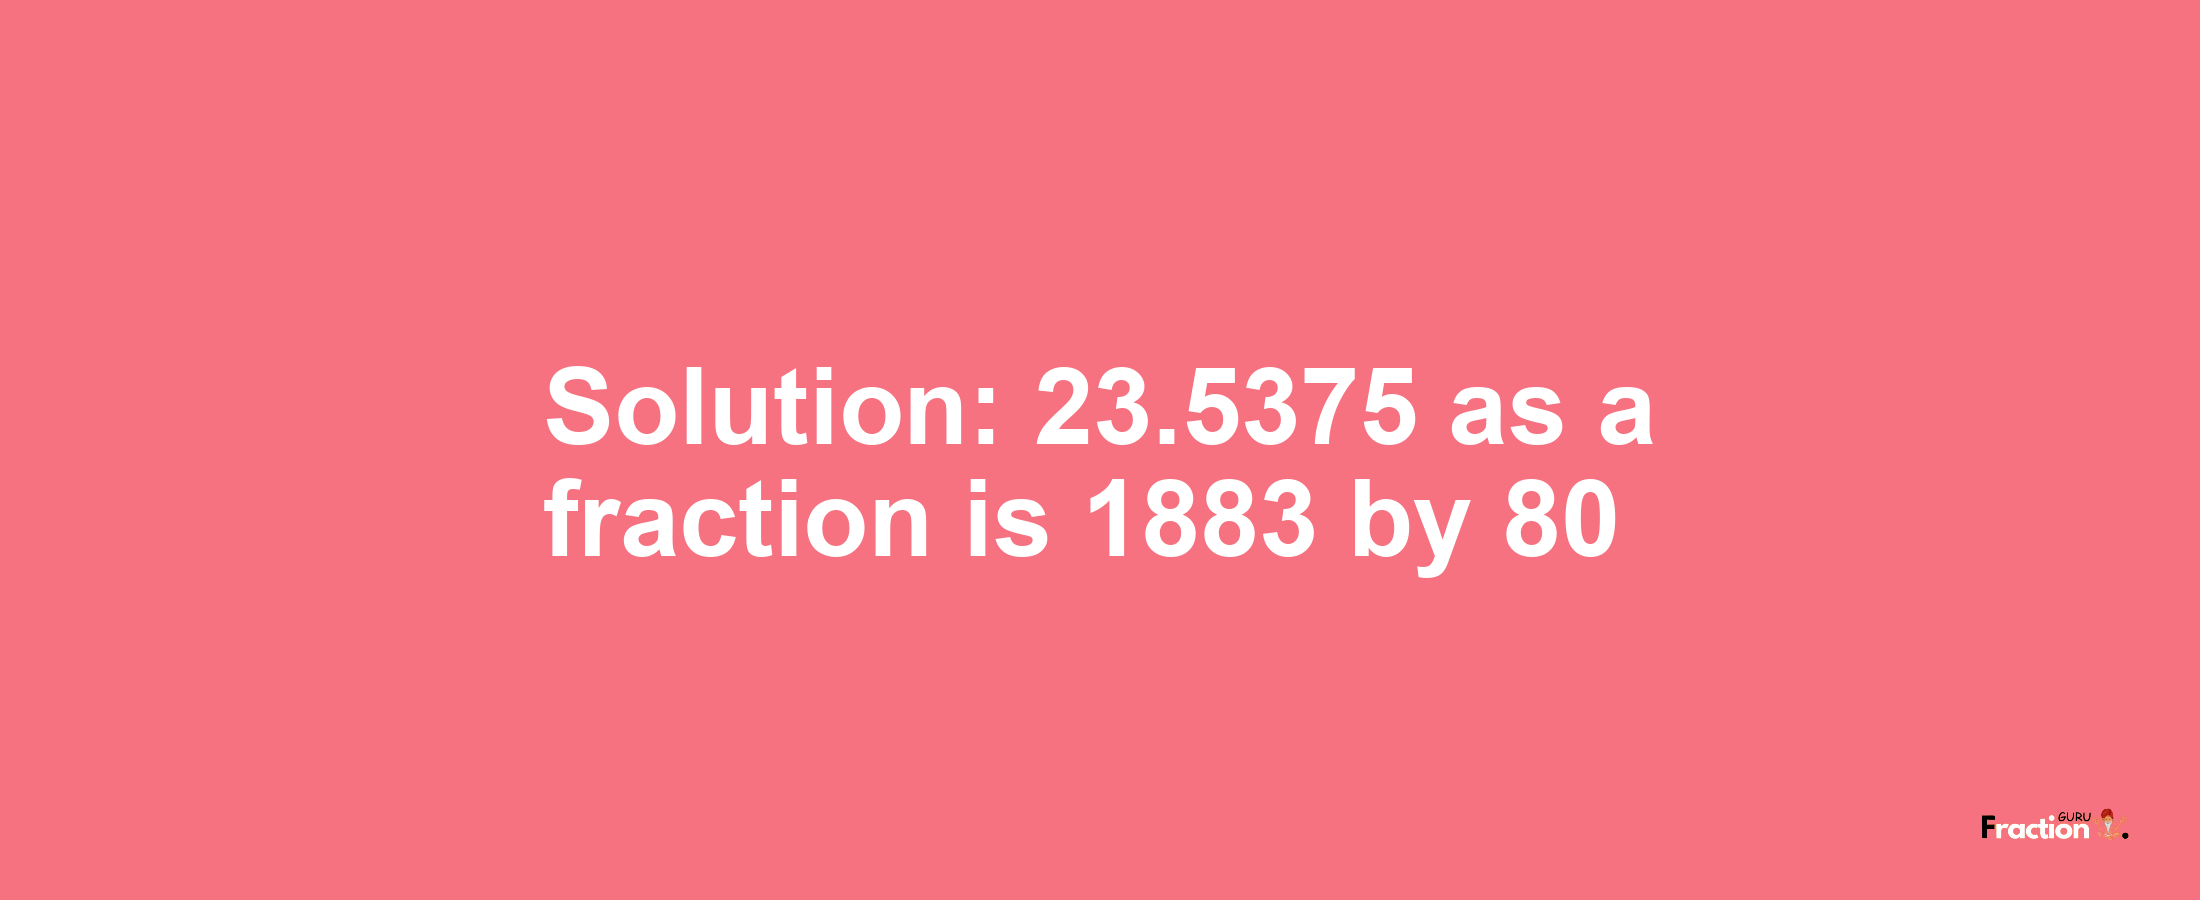 Solution:23.5375 as a fraction is 1883/80